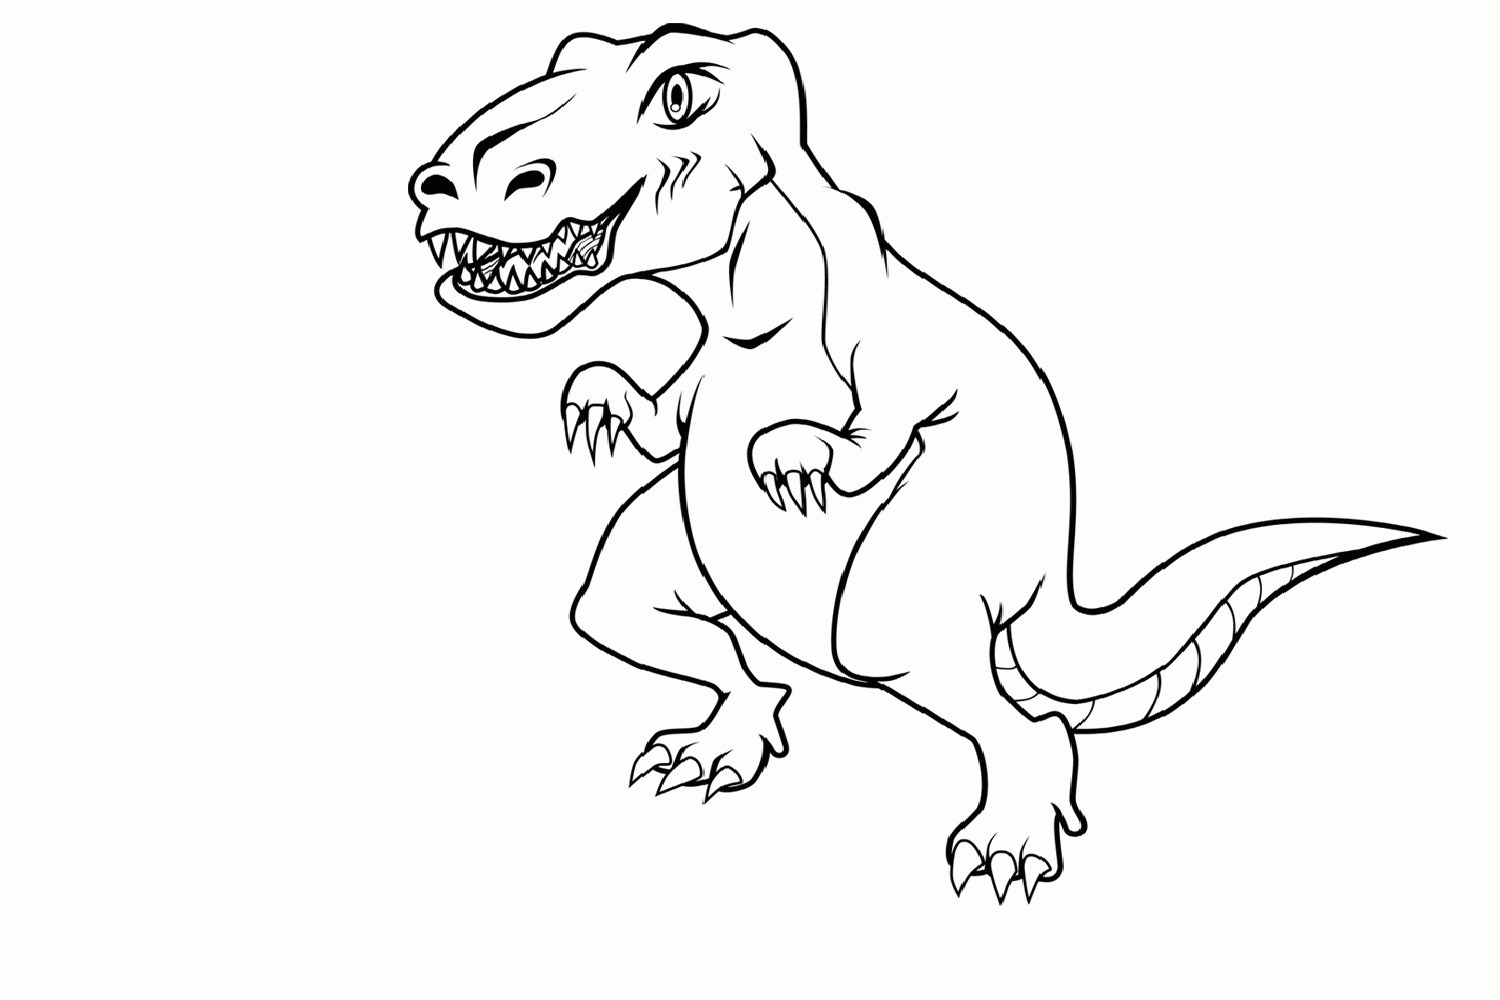 Download Simple Dinosaur Coloring Page - Coloring Home